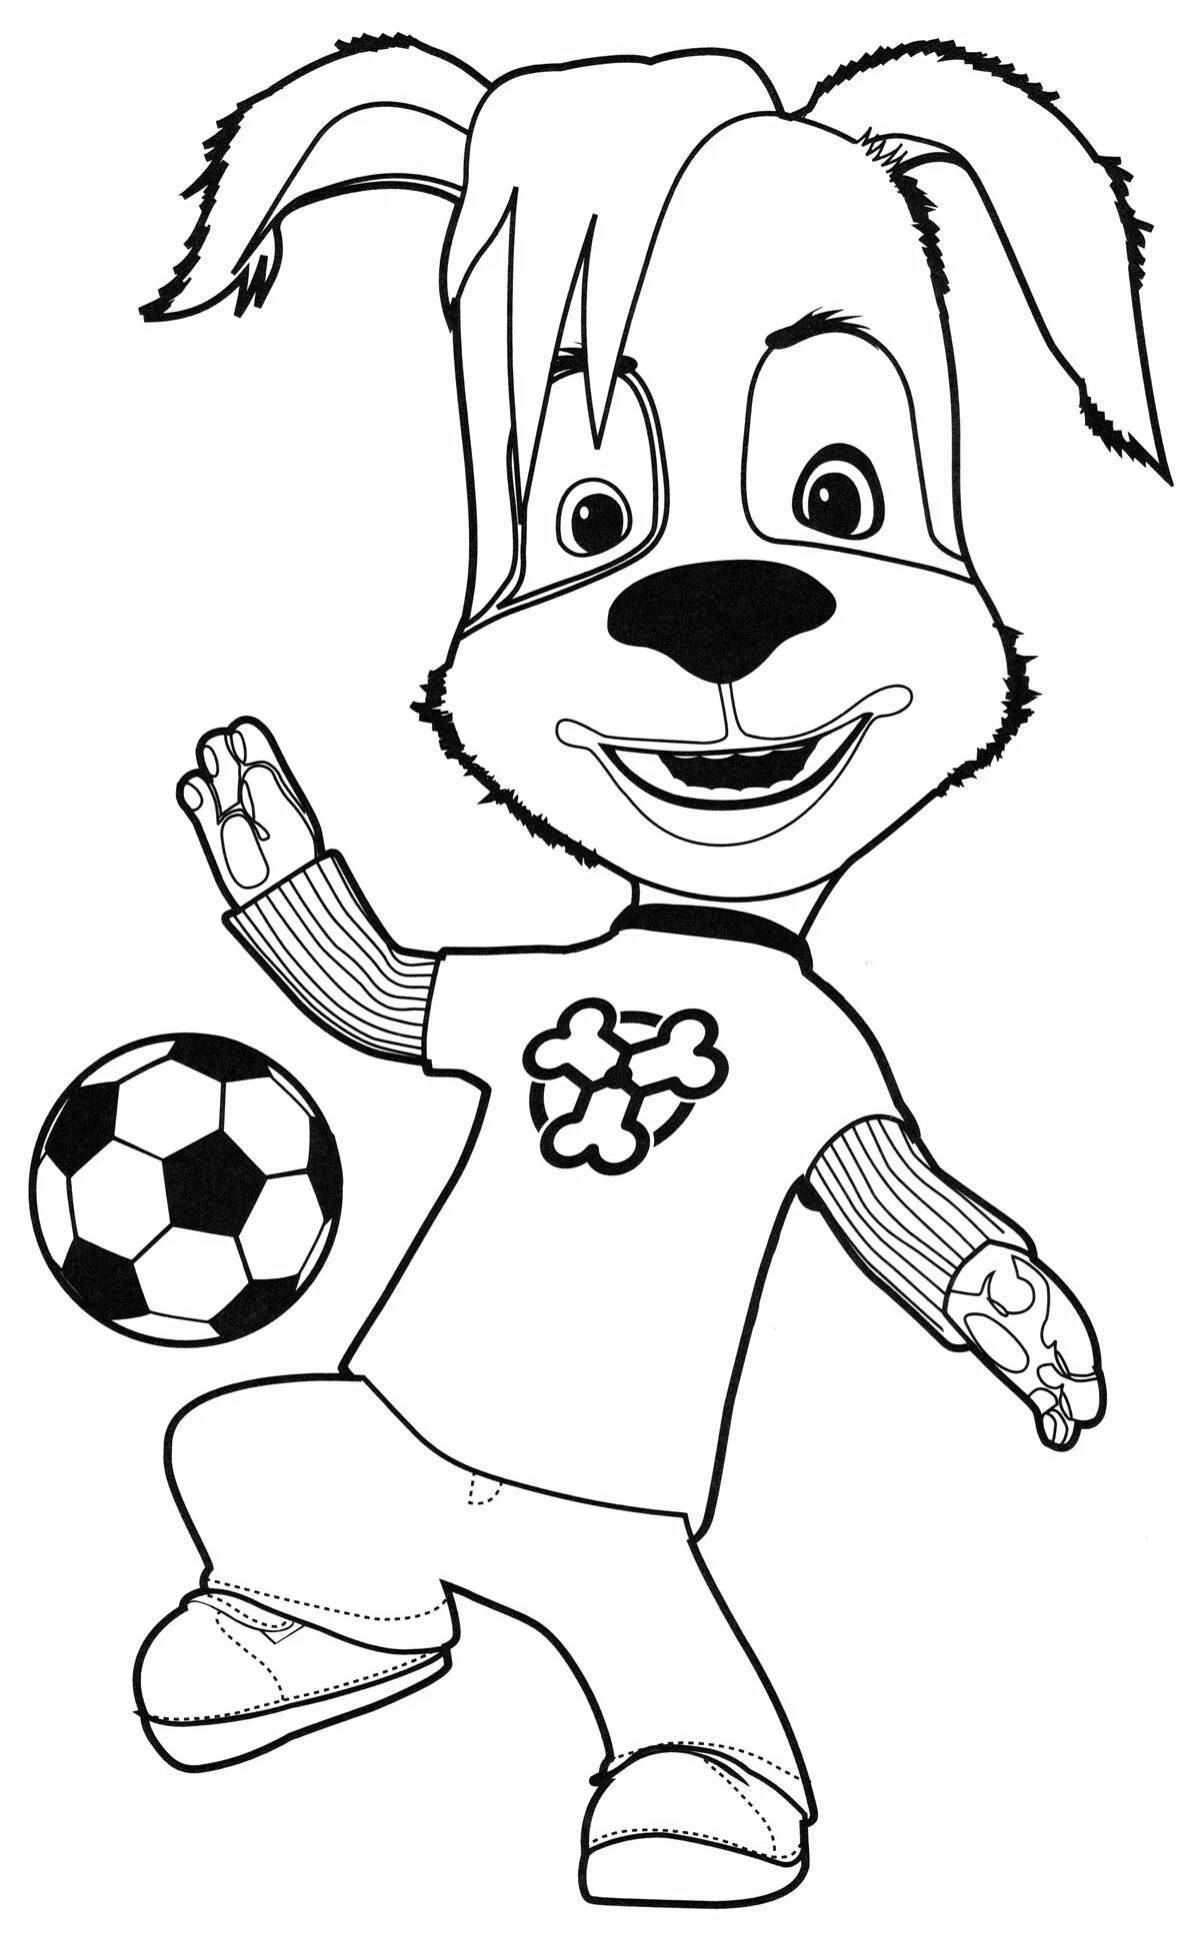 Cute barboskins all coloring pages